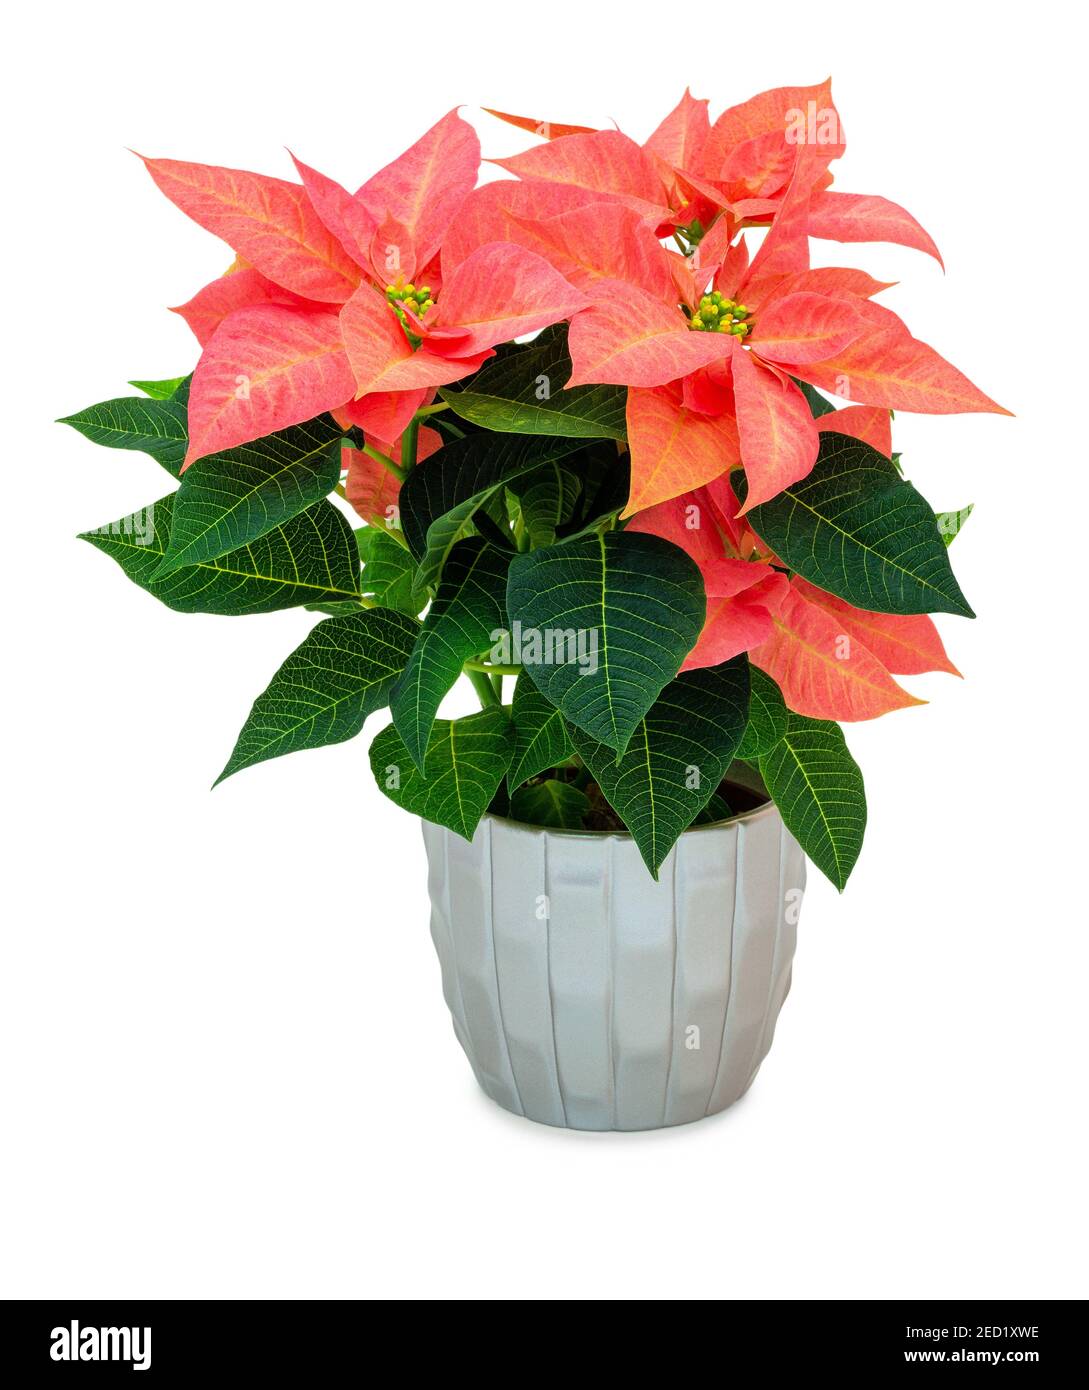 Bright red poinsettia flower in silver flower pot isolated on white background with shadow. Light orange Christmas Flower in metallic pot Stock Photo